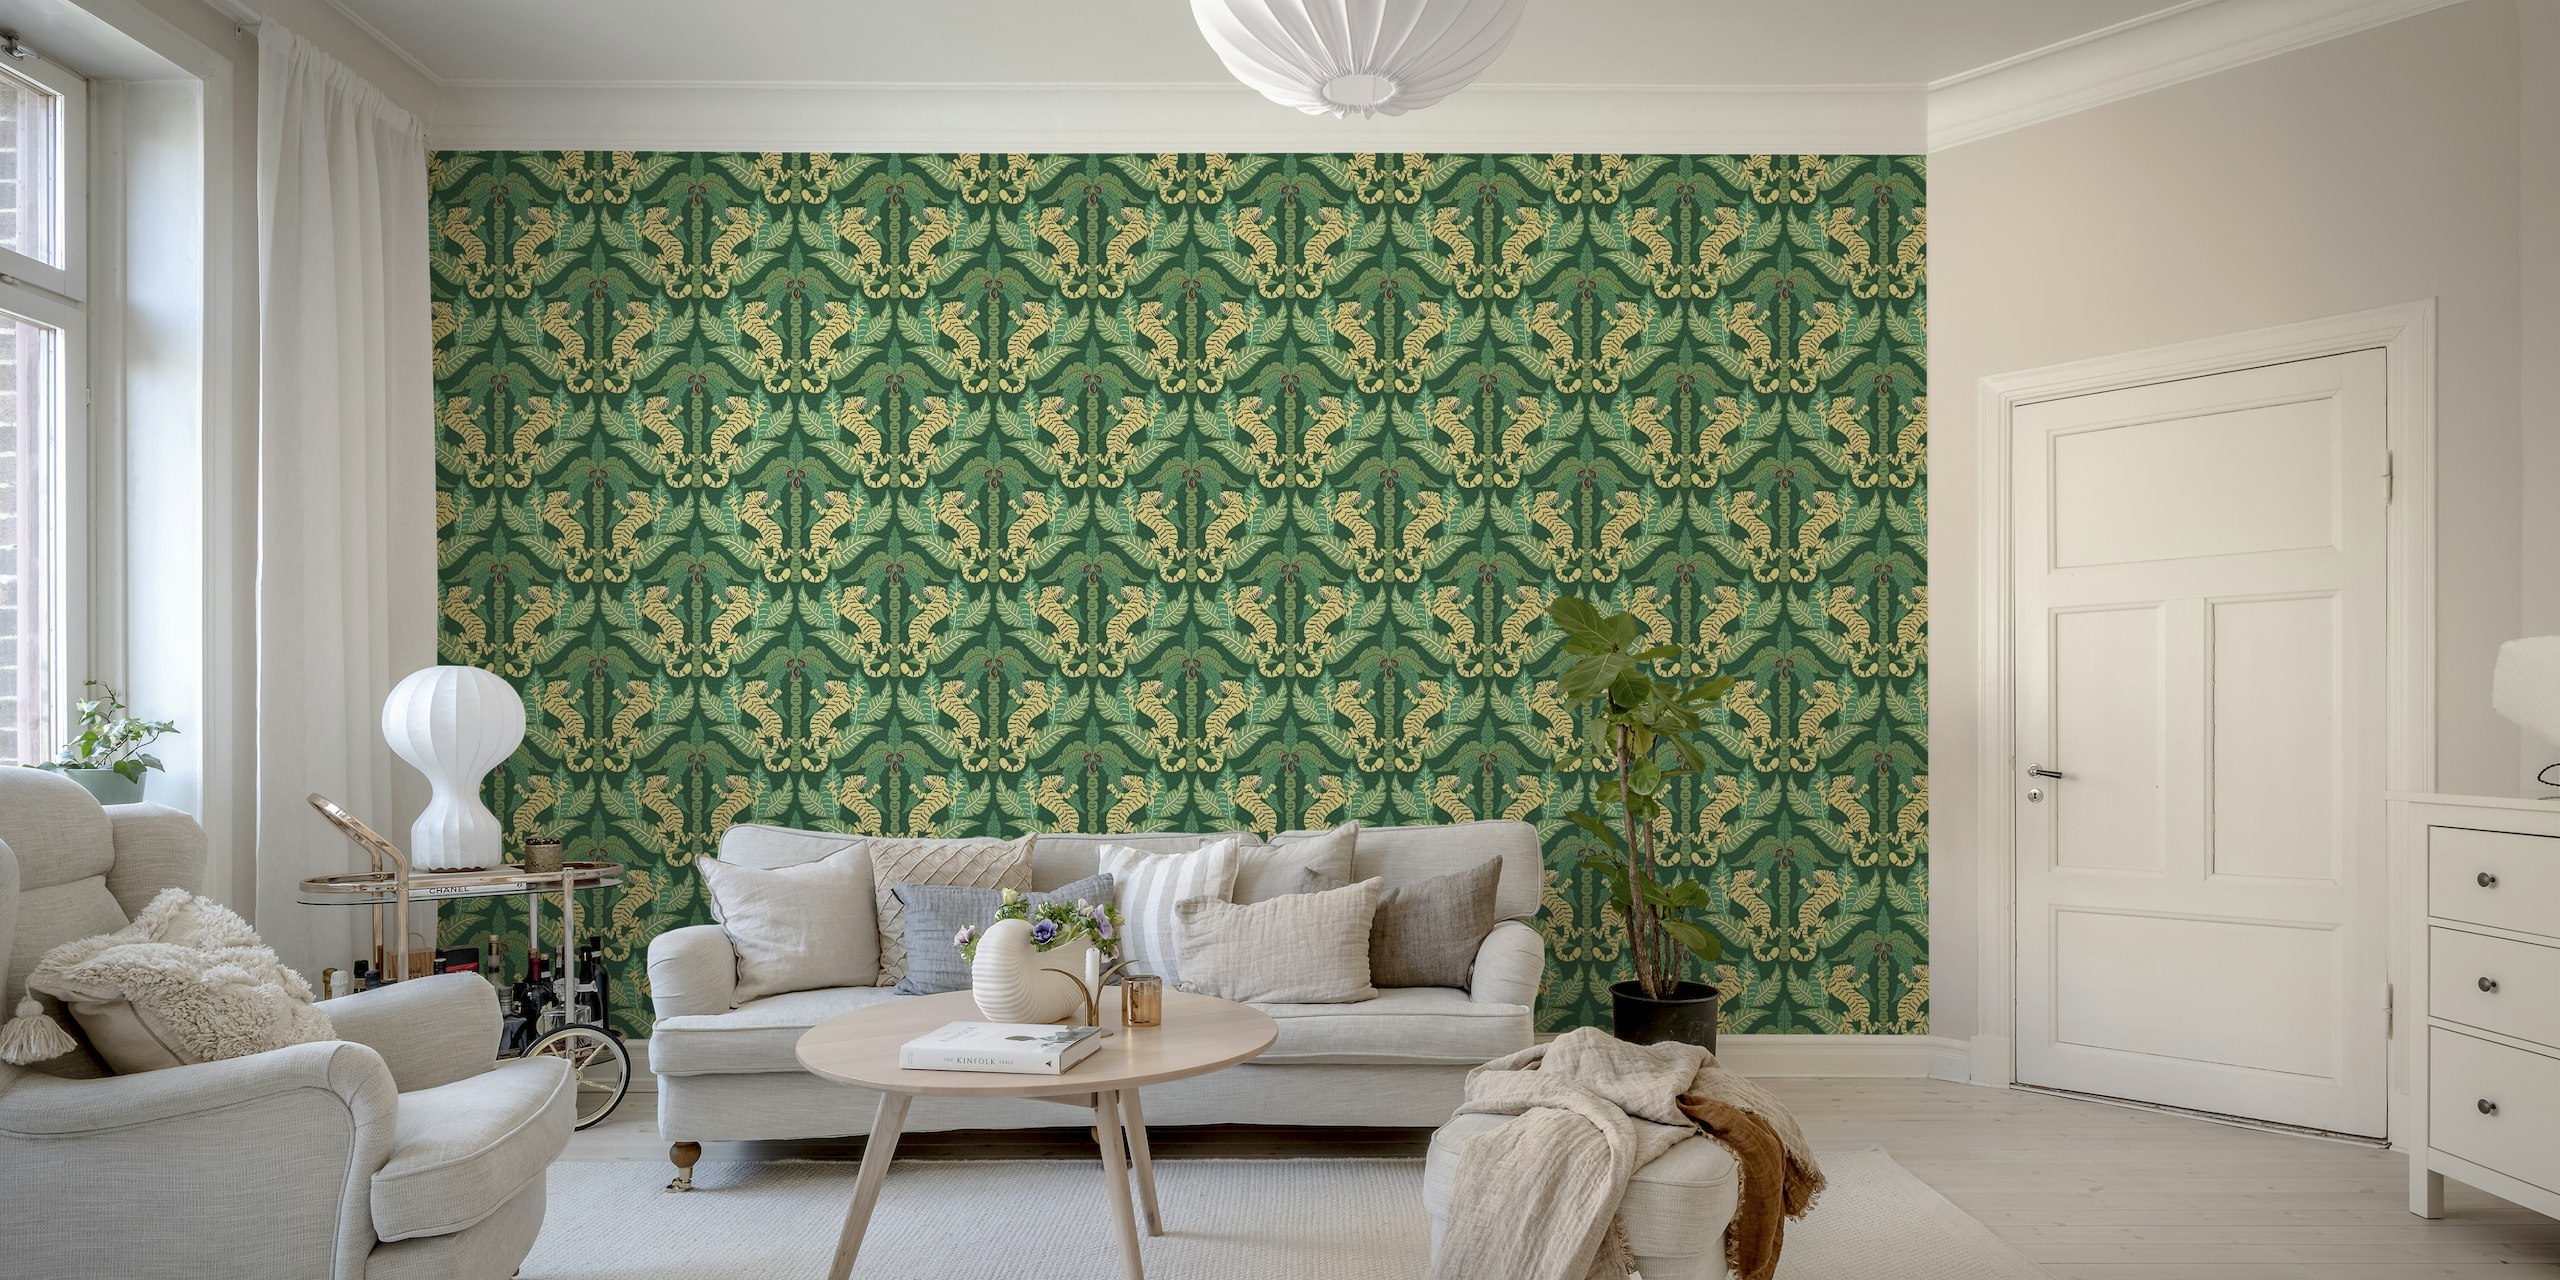 Tiger Damask - yellow and green tapet